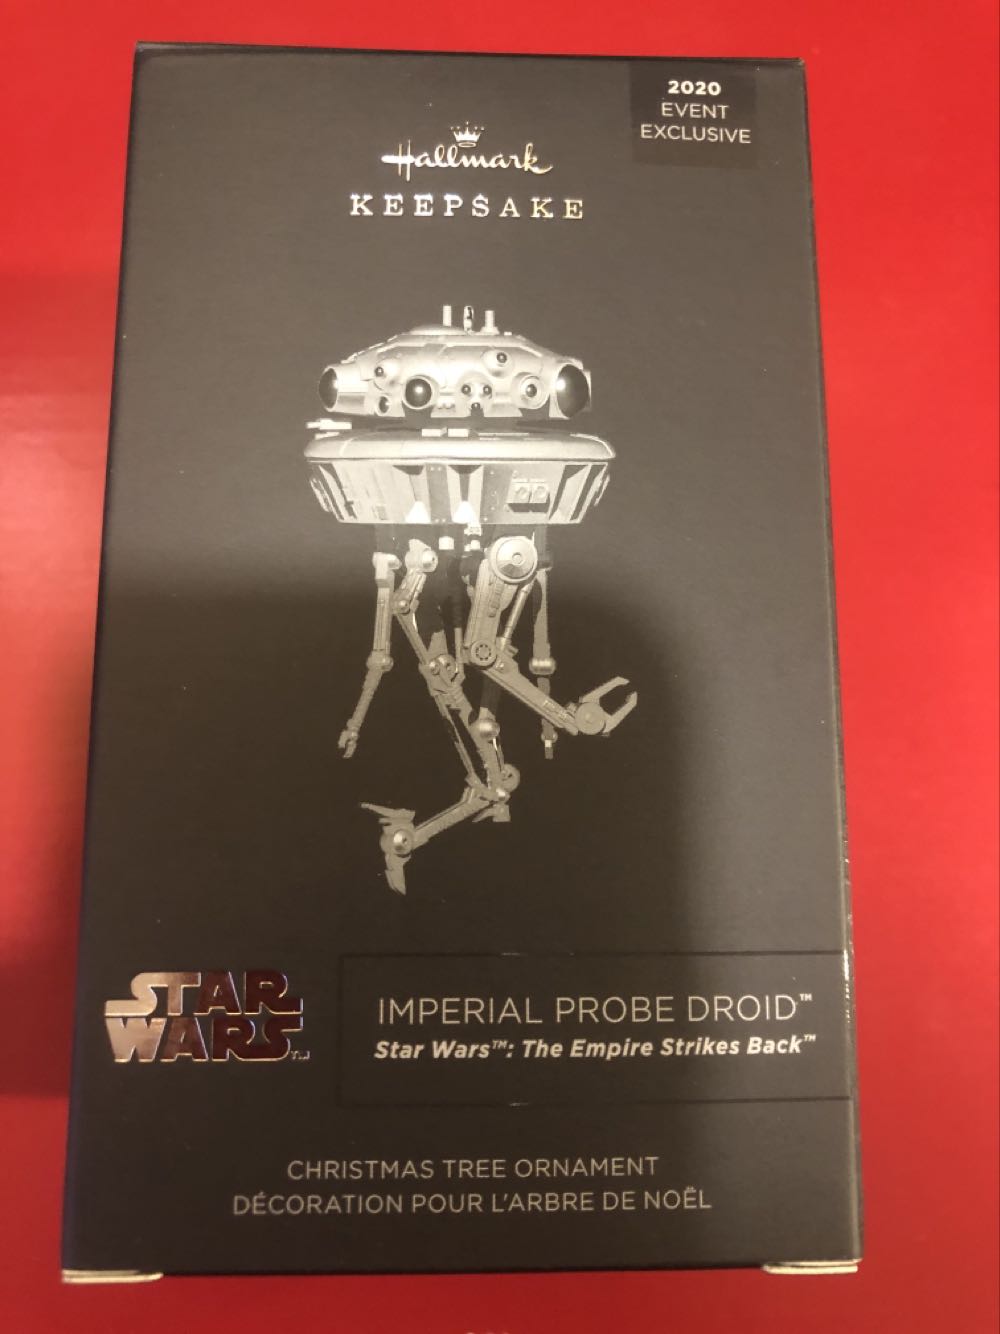 Imperial Probe Droid - Star Wars: The Empire Strikes Back (Star Wars) ornament collectible - Main Image 1